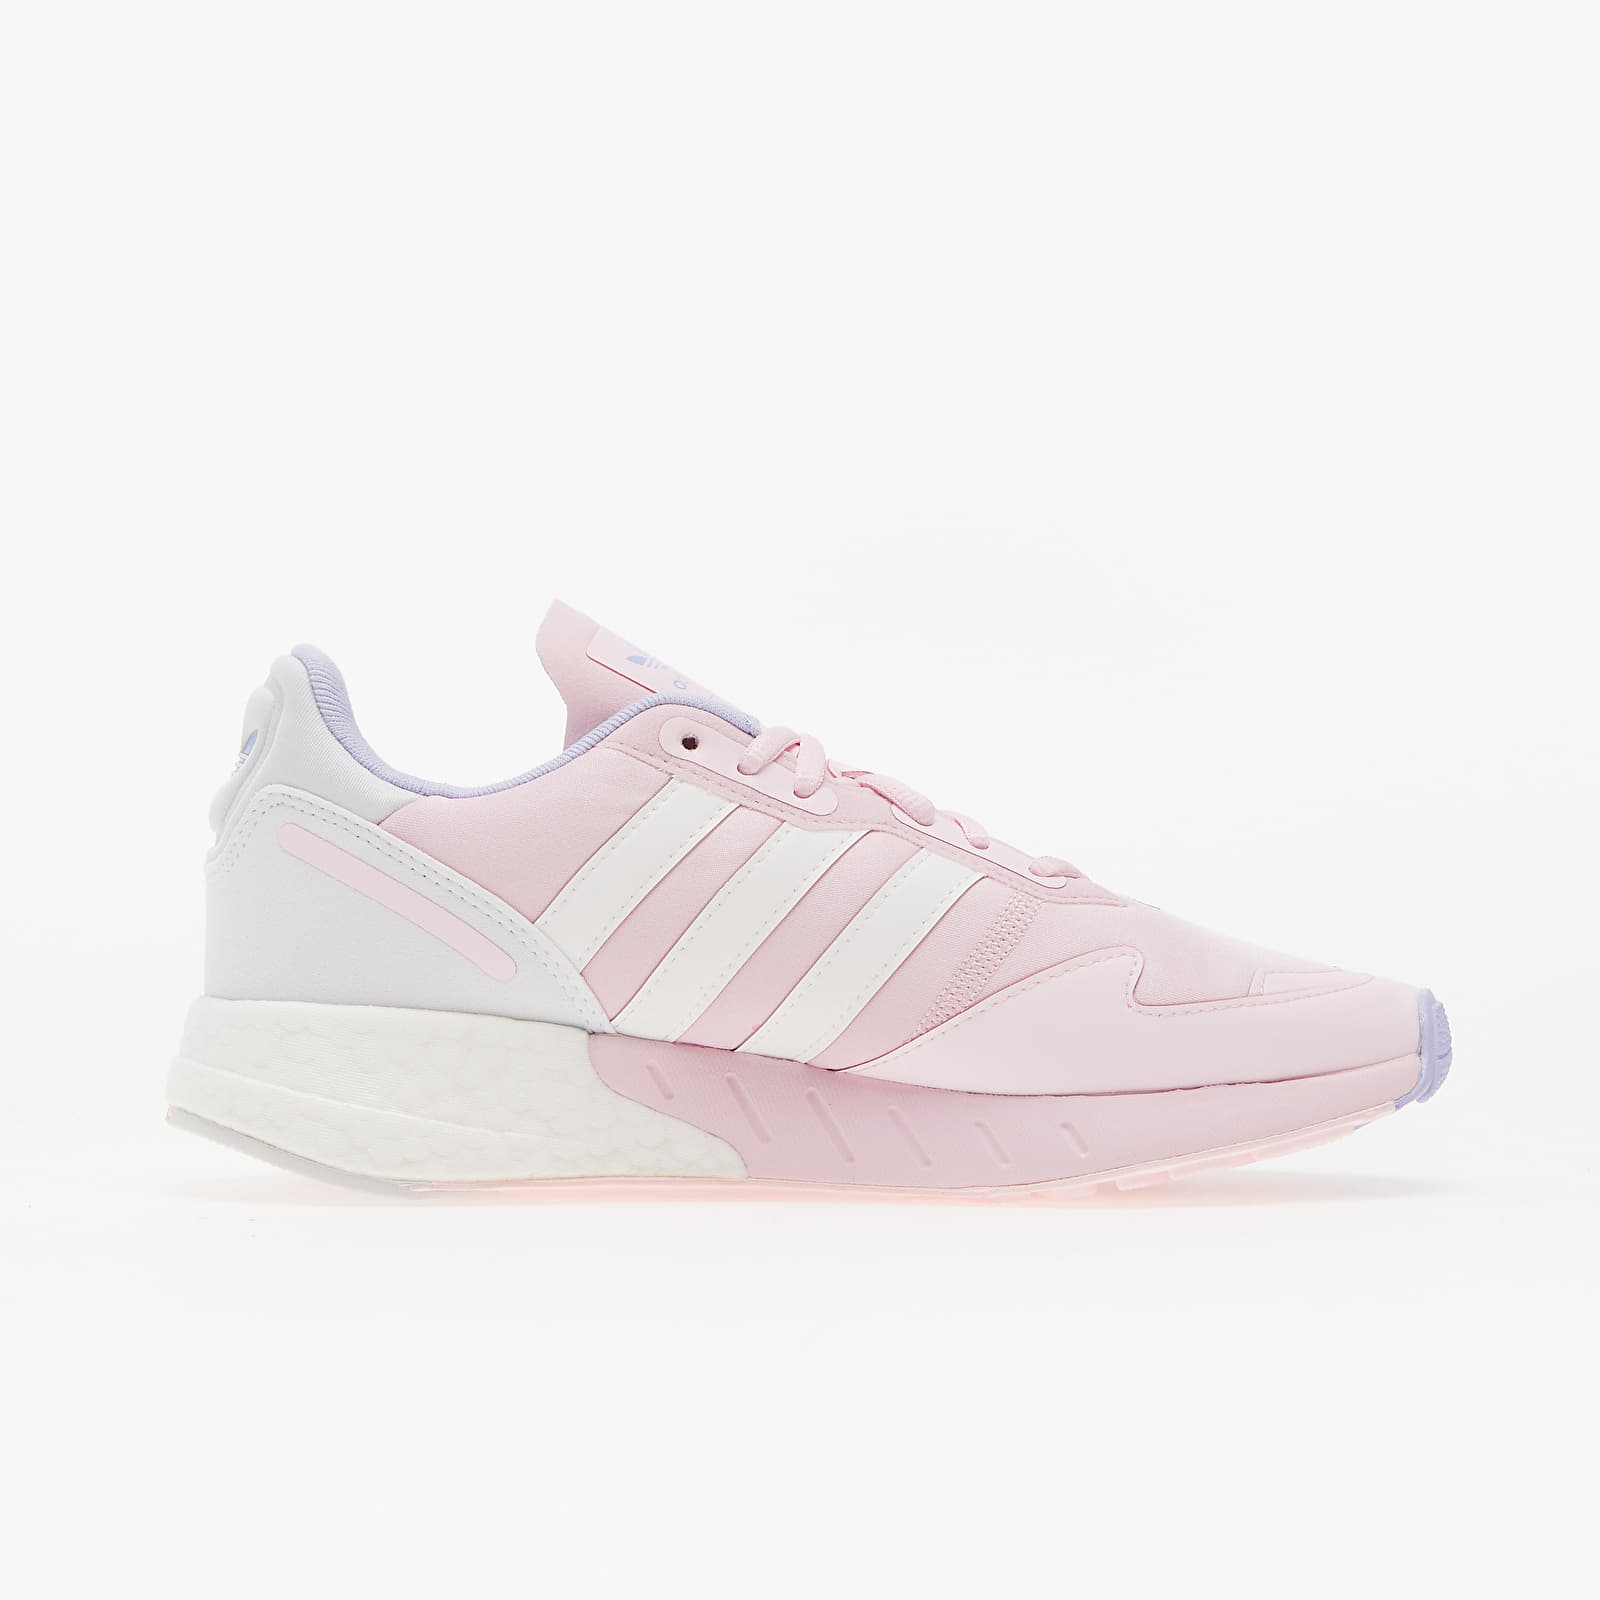 Women's shoes adidas ZX 1K Boost W Clear Pink/ Ftw White/ Violet 